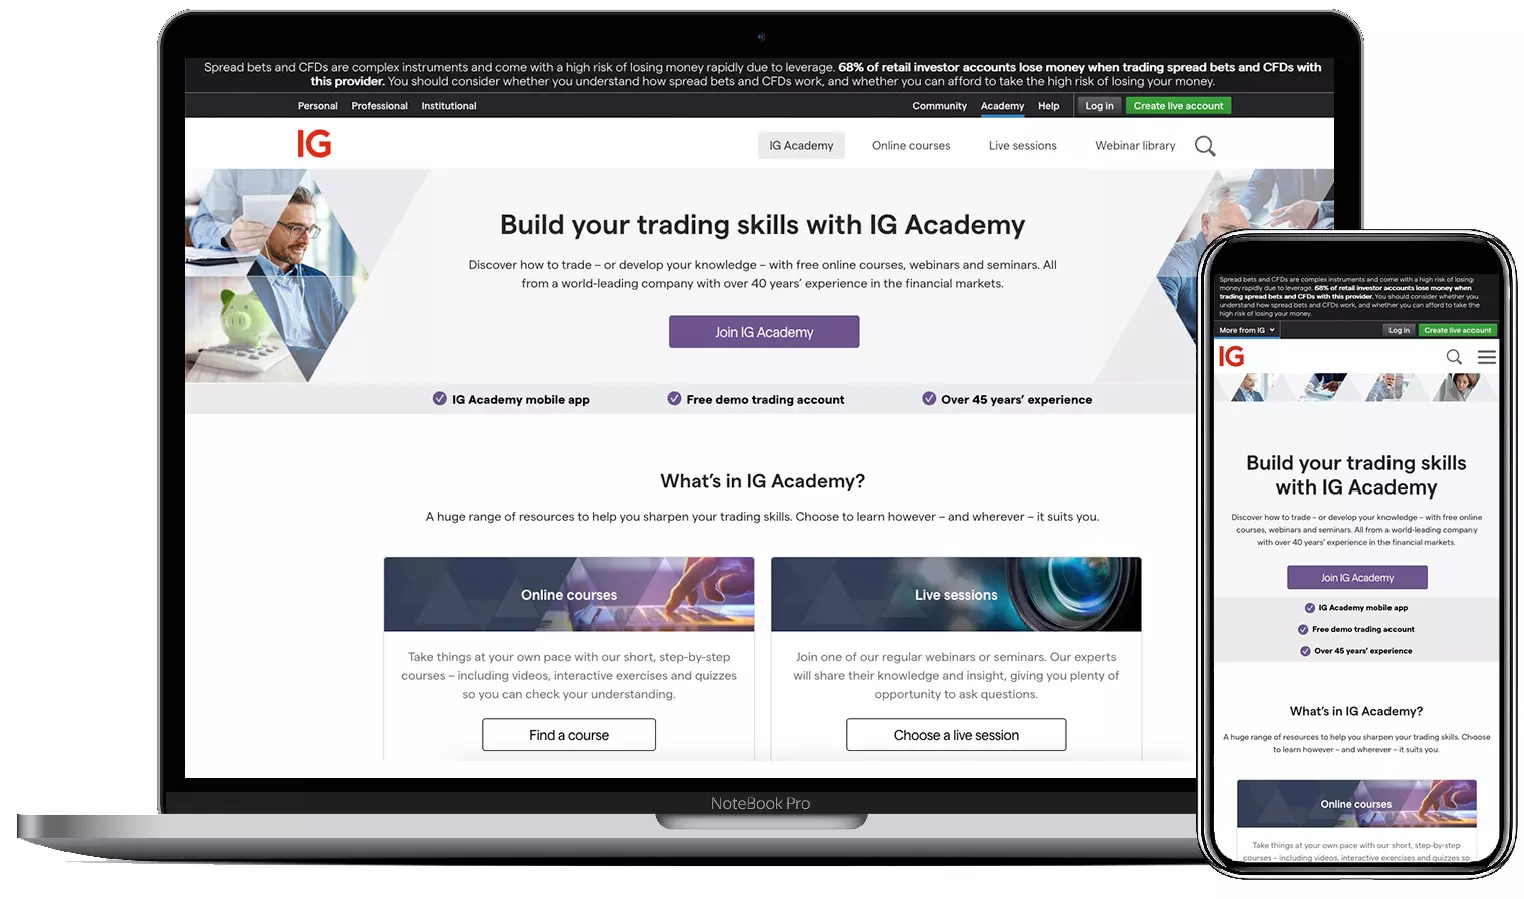 Learn how to trade stocks with IG Academy